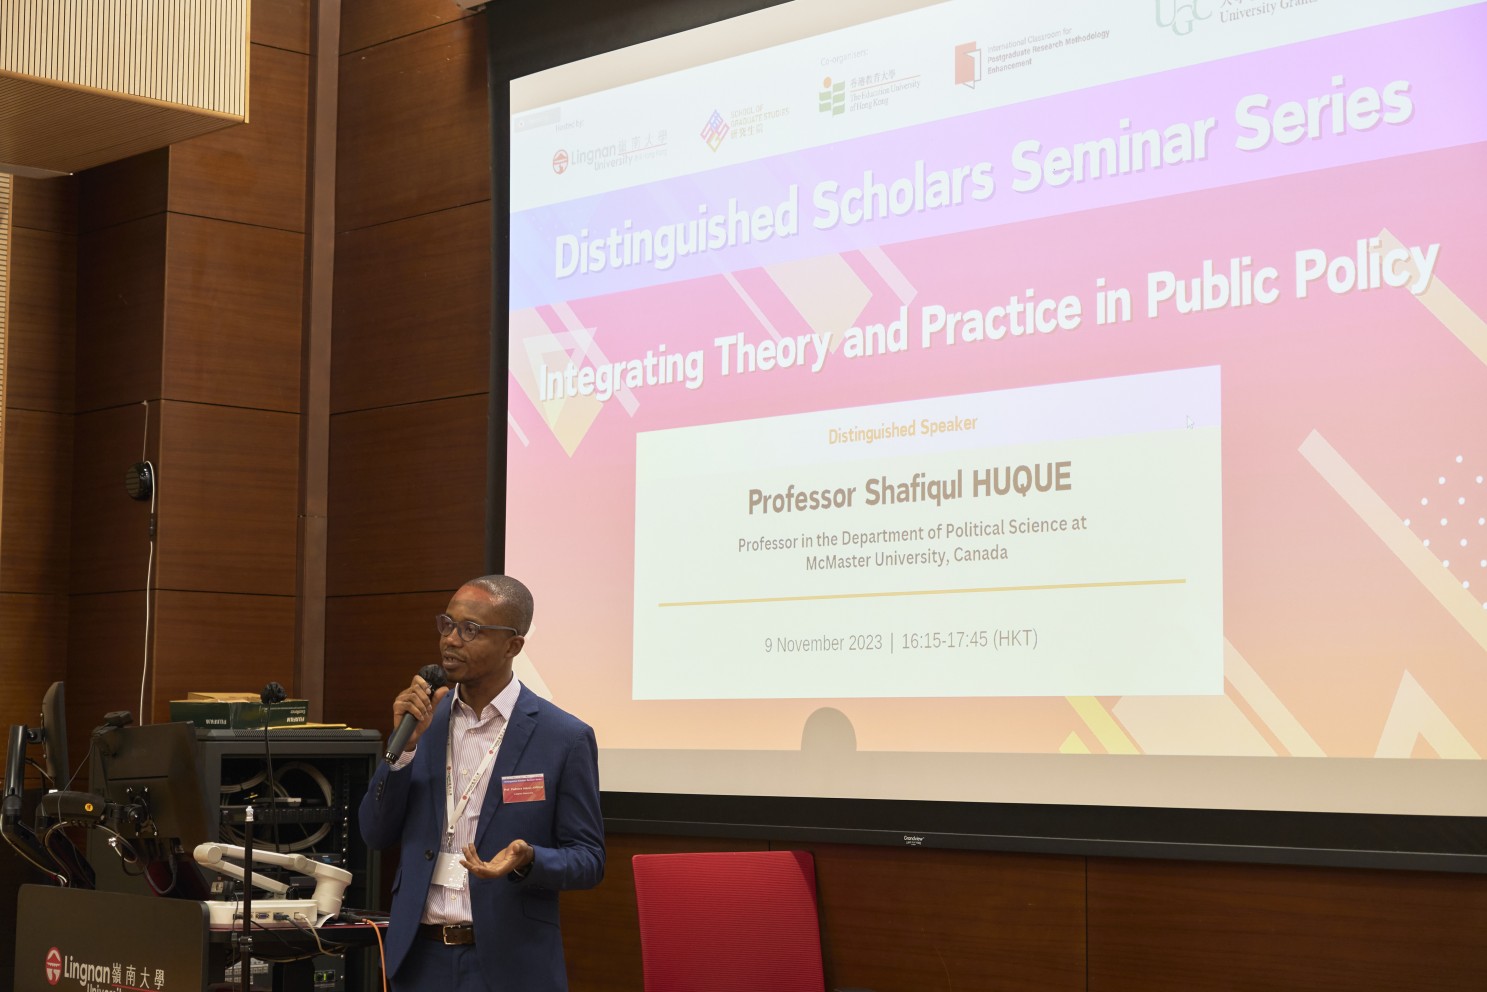 Prof Padmore Amoah Adusei, Assistant Professor at the School of Graduate Studies in Lingnan University, delivers his welcome address.